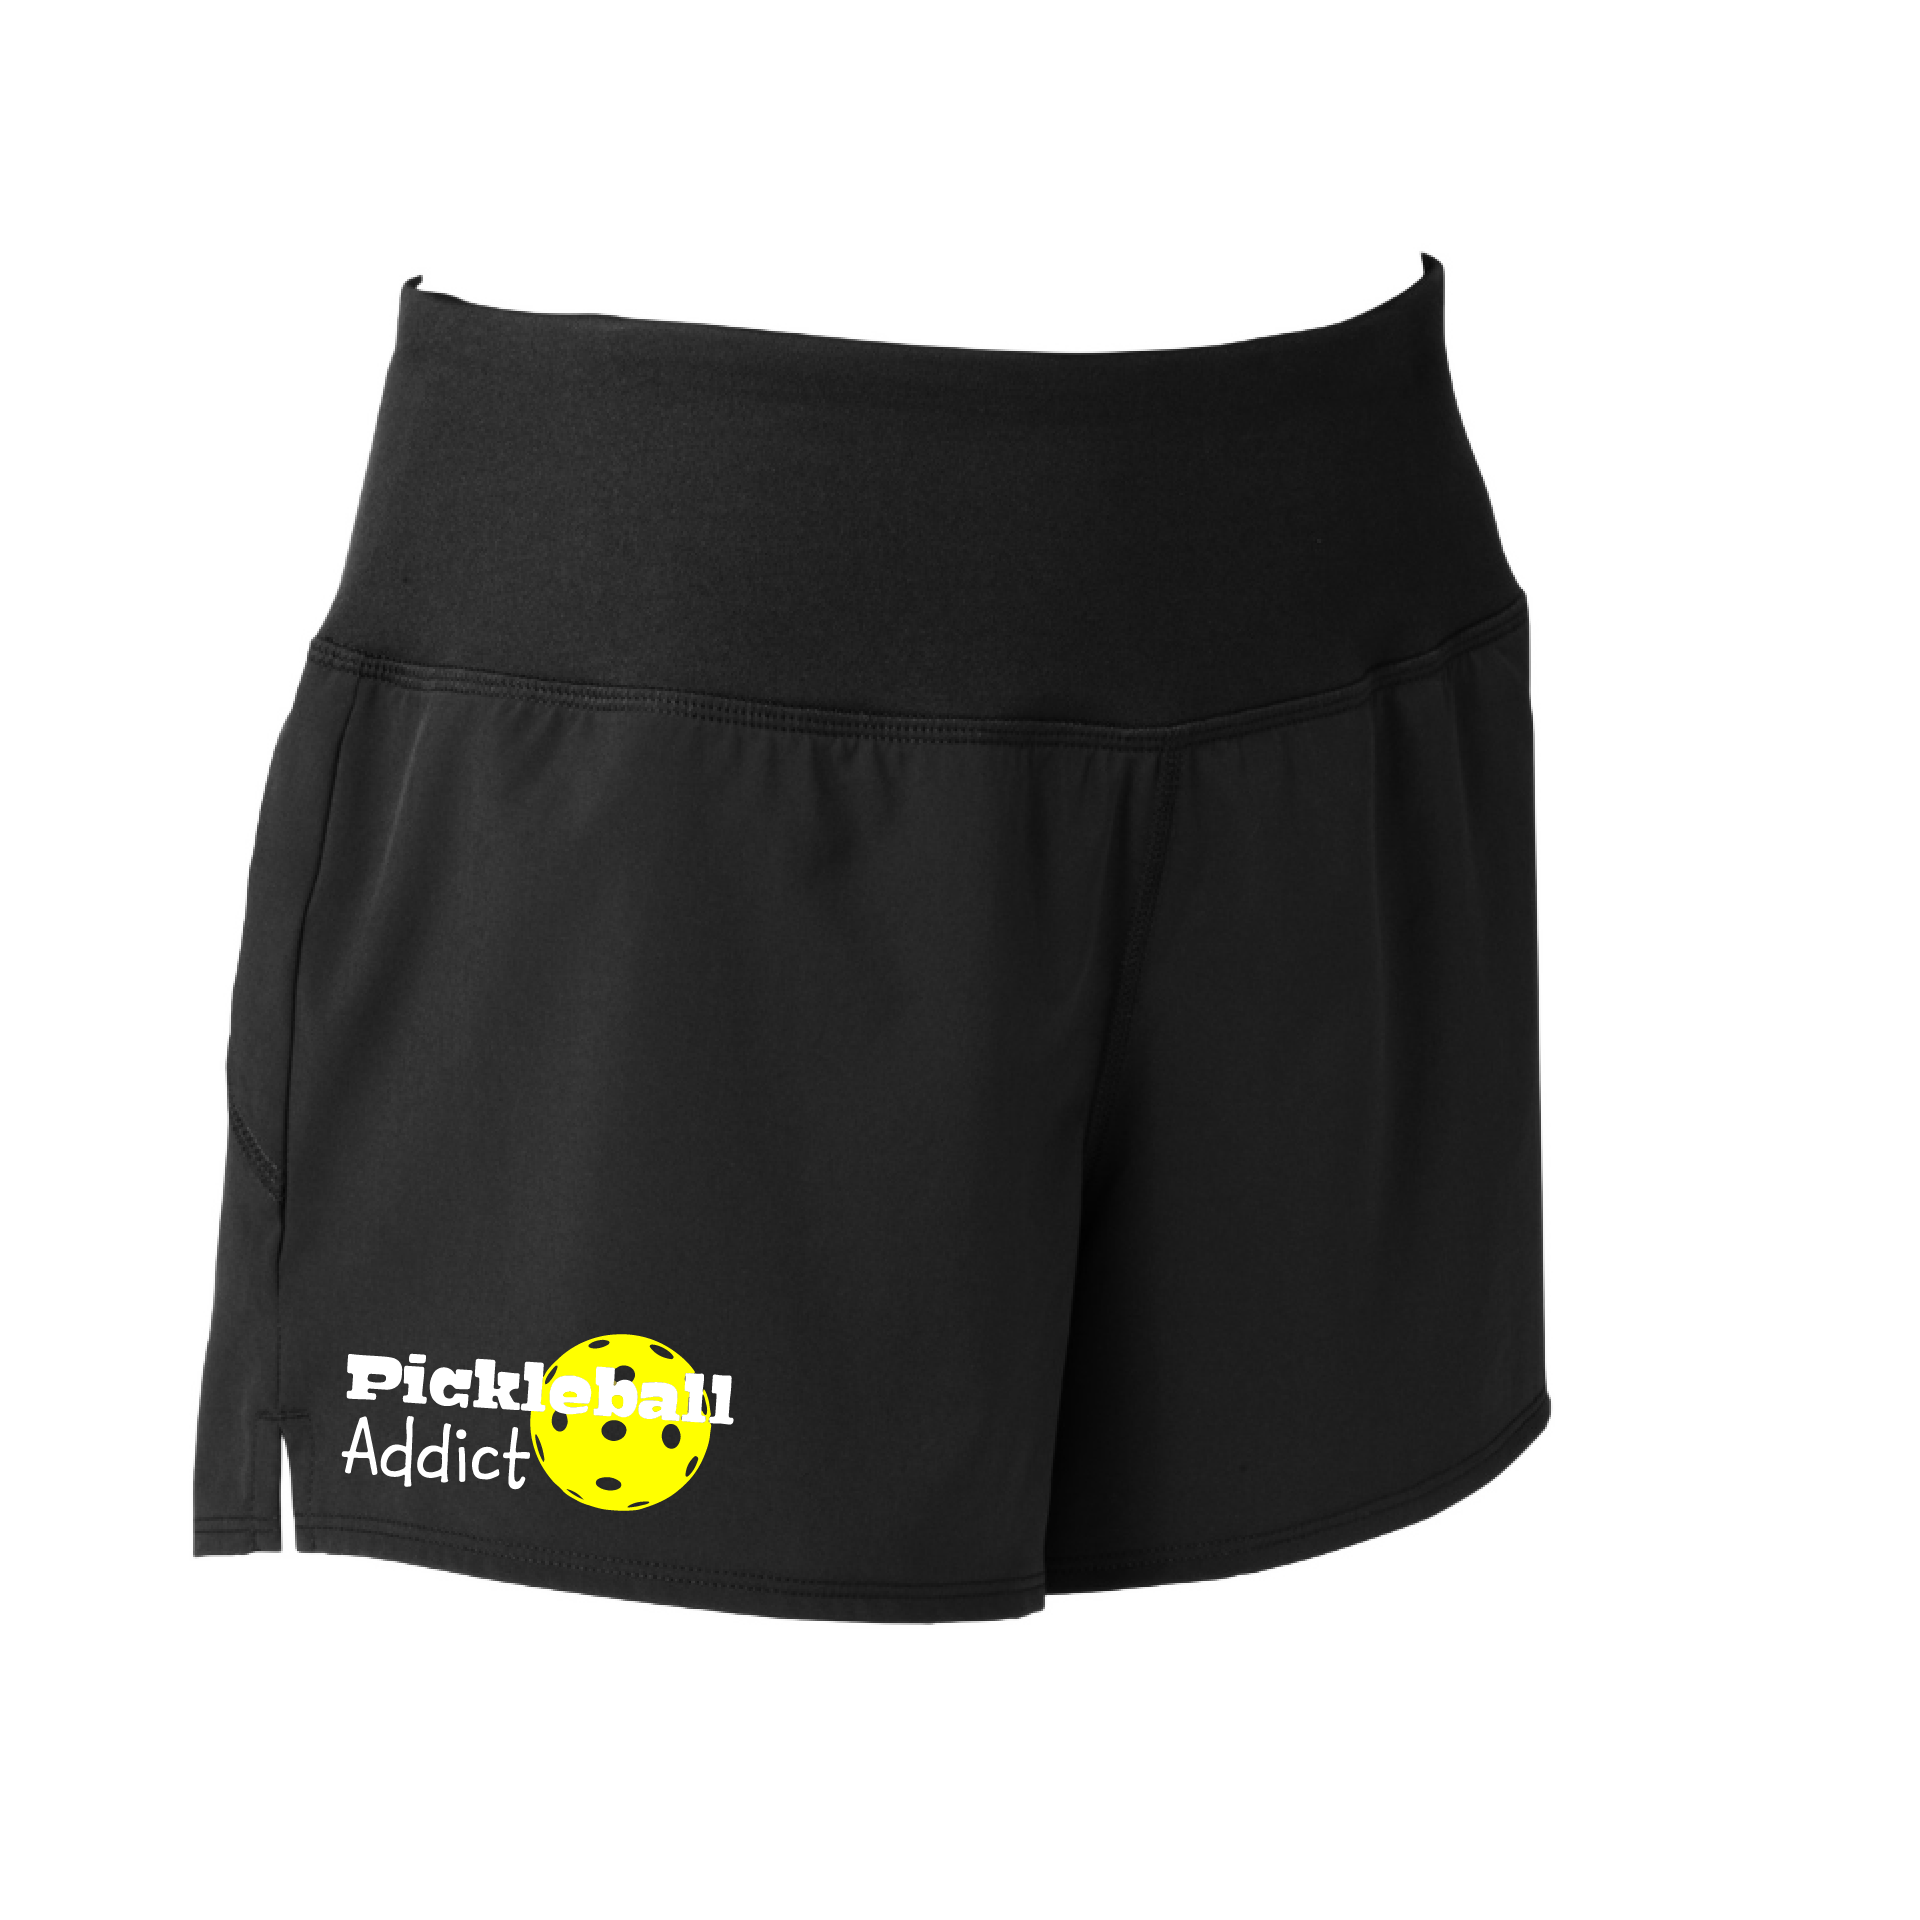 Pickleball Shorts Designs: Pickleball Addict  Sport Tek women’s repeat shorts come with built-in cell phone pocket on the exterior of the waistband. You can also feel secure knowing that no matter how strenuous the exercise, the shorts will remain in place (it won’t ride up!). These shorts are extremely versatile and trendy. Transition from the Pickleball court to running errands smoothly.